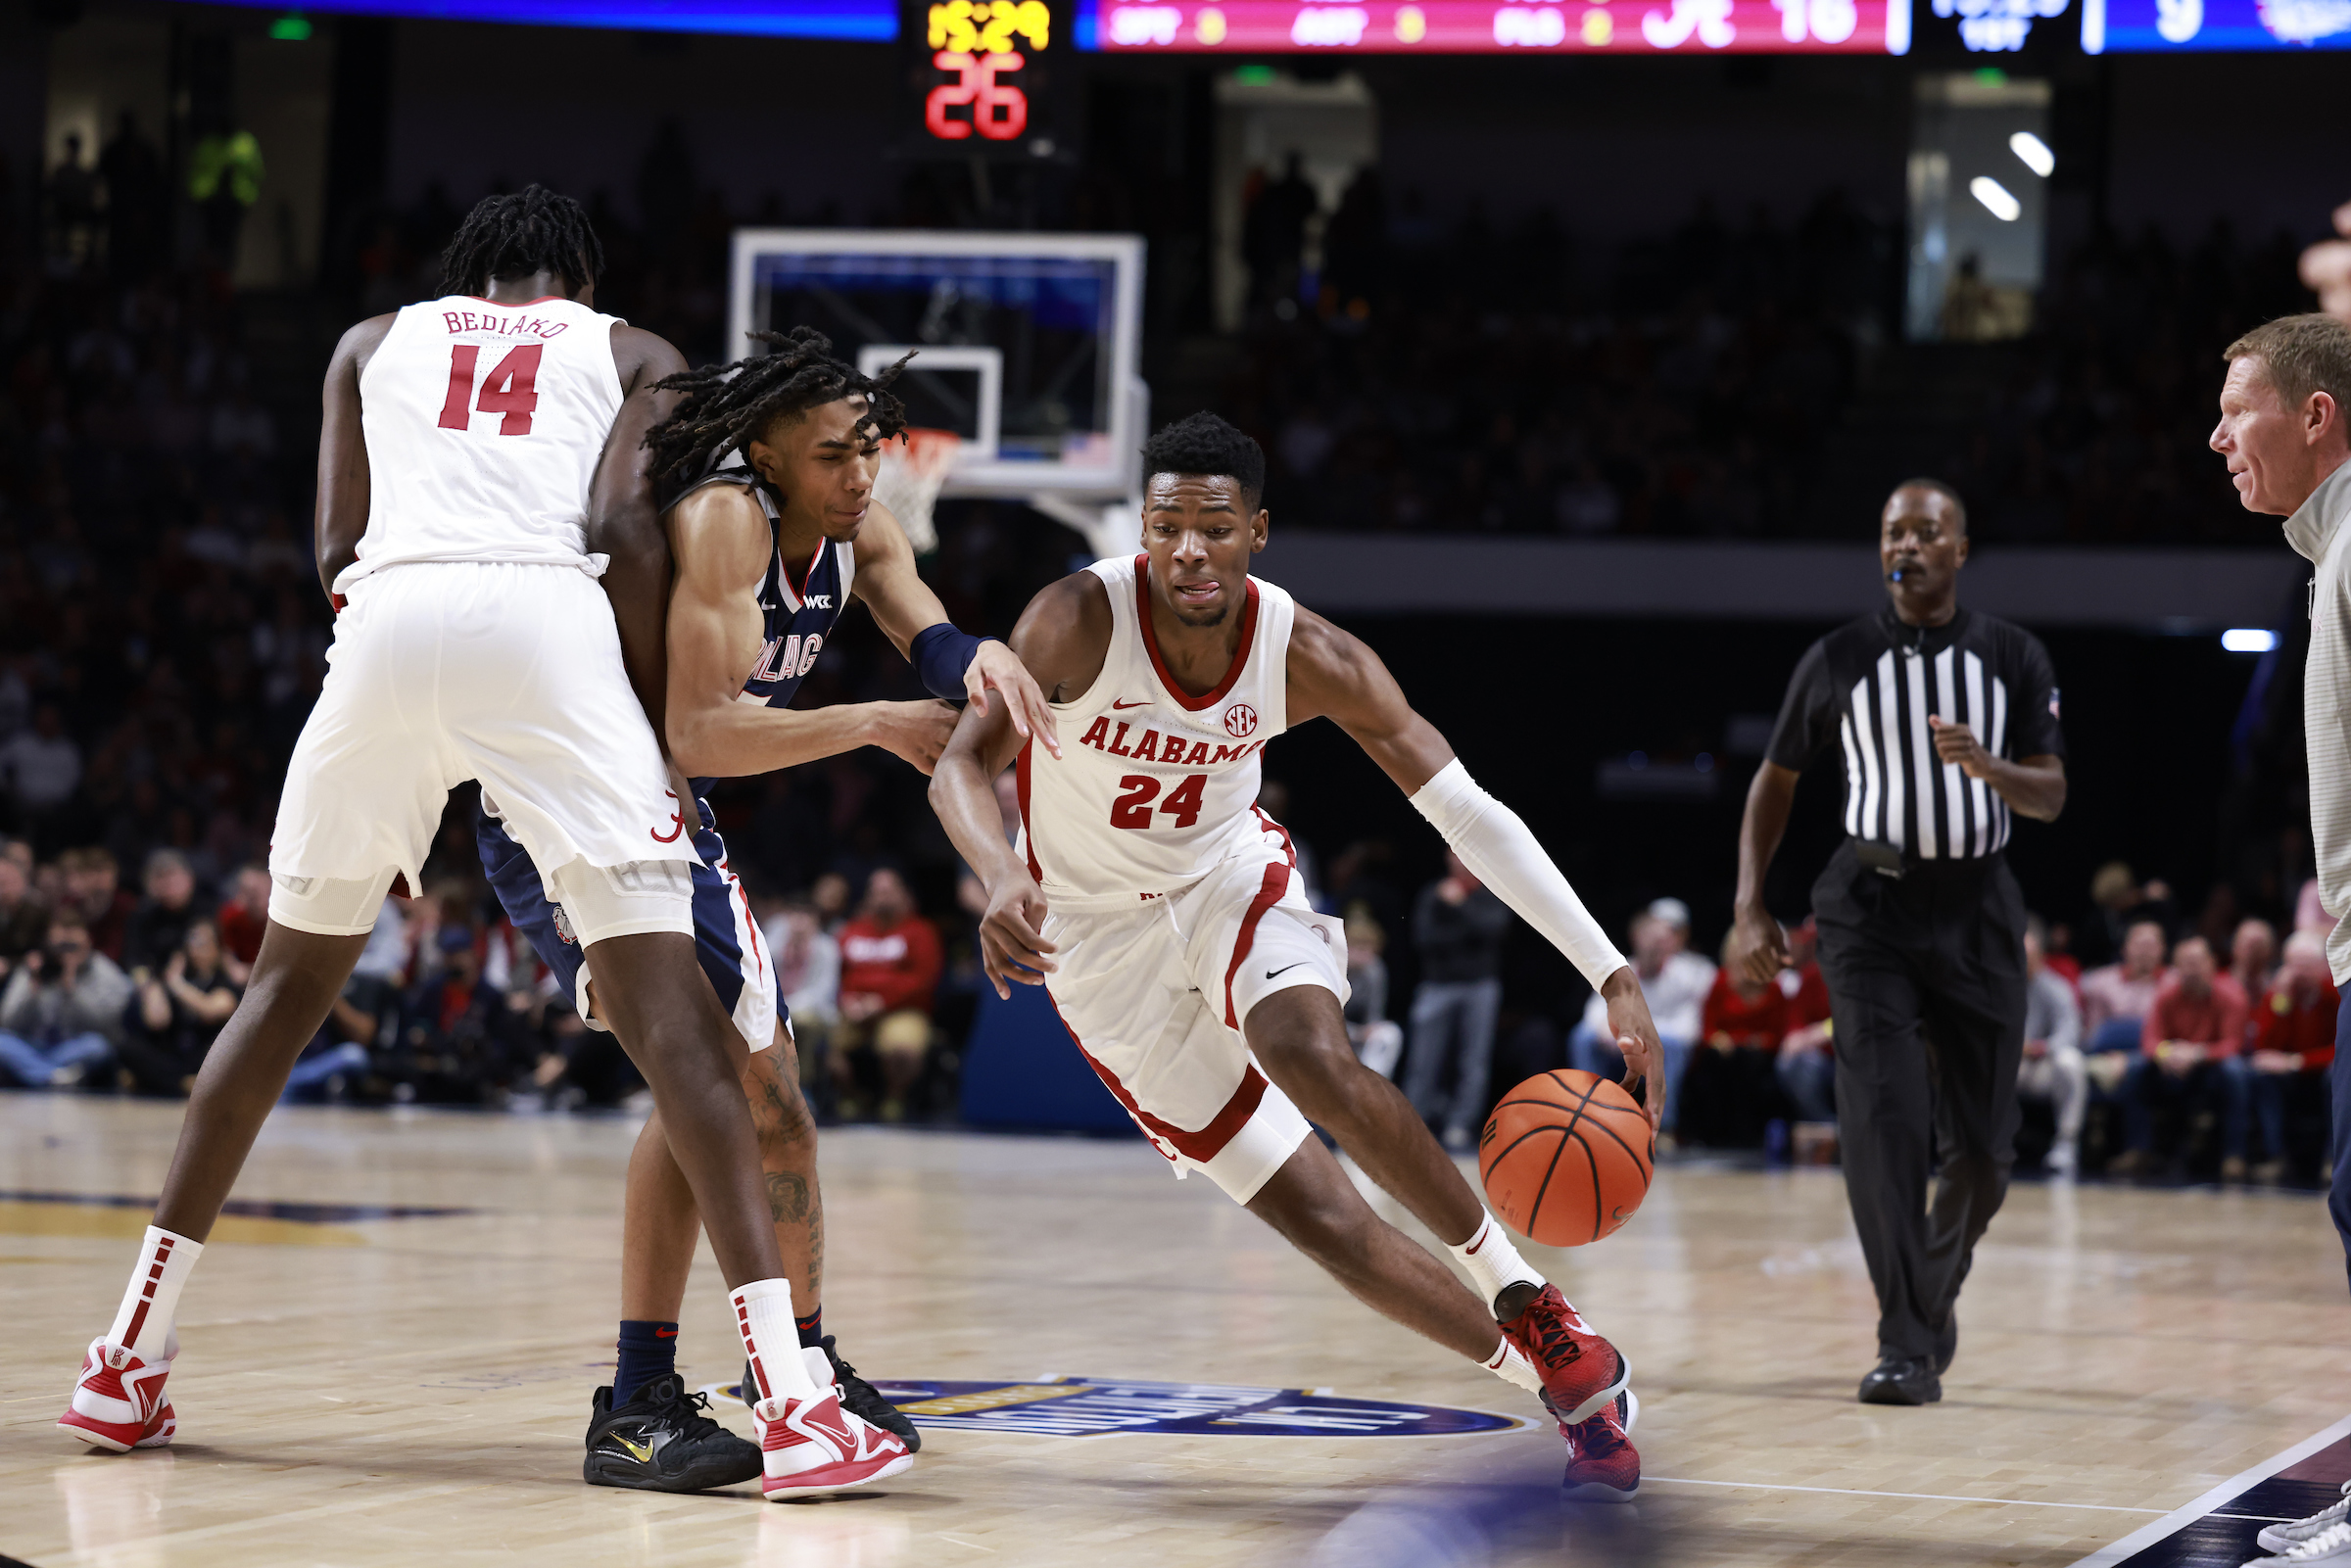 Reports: Brandon Miller recovering from mono ahead of next month's NBA Draft  - WVUA 23